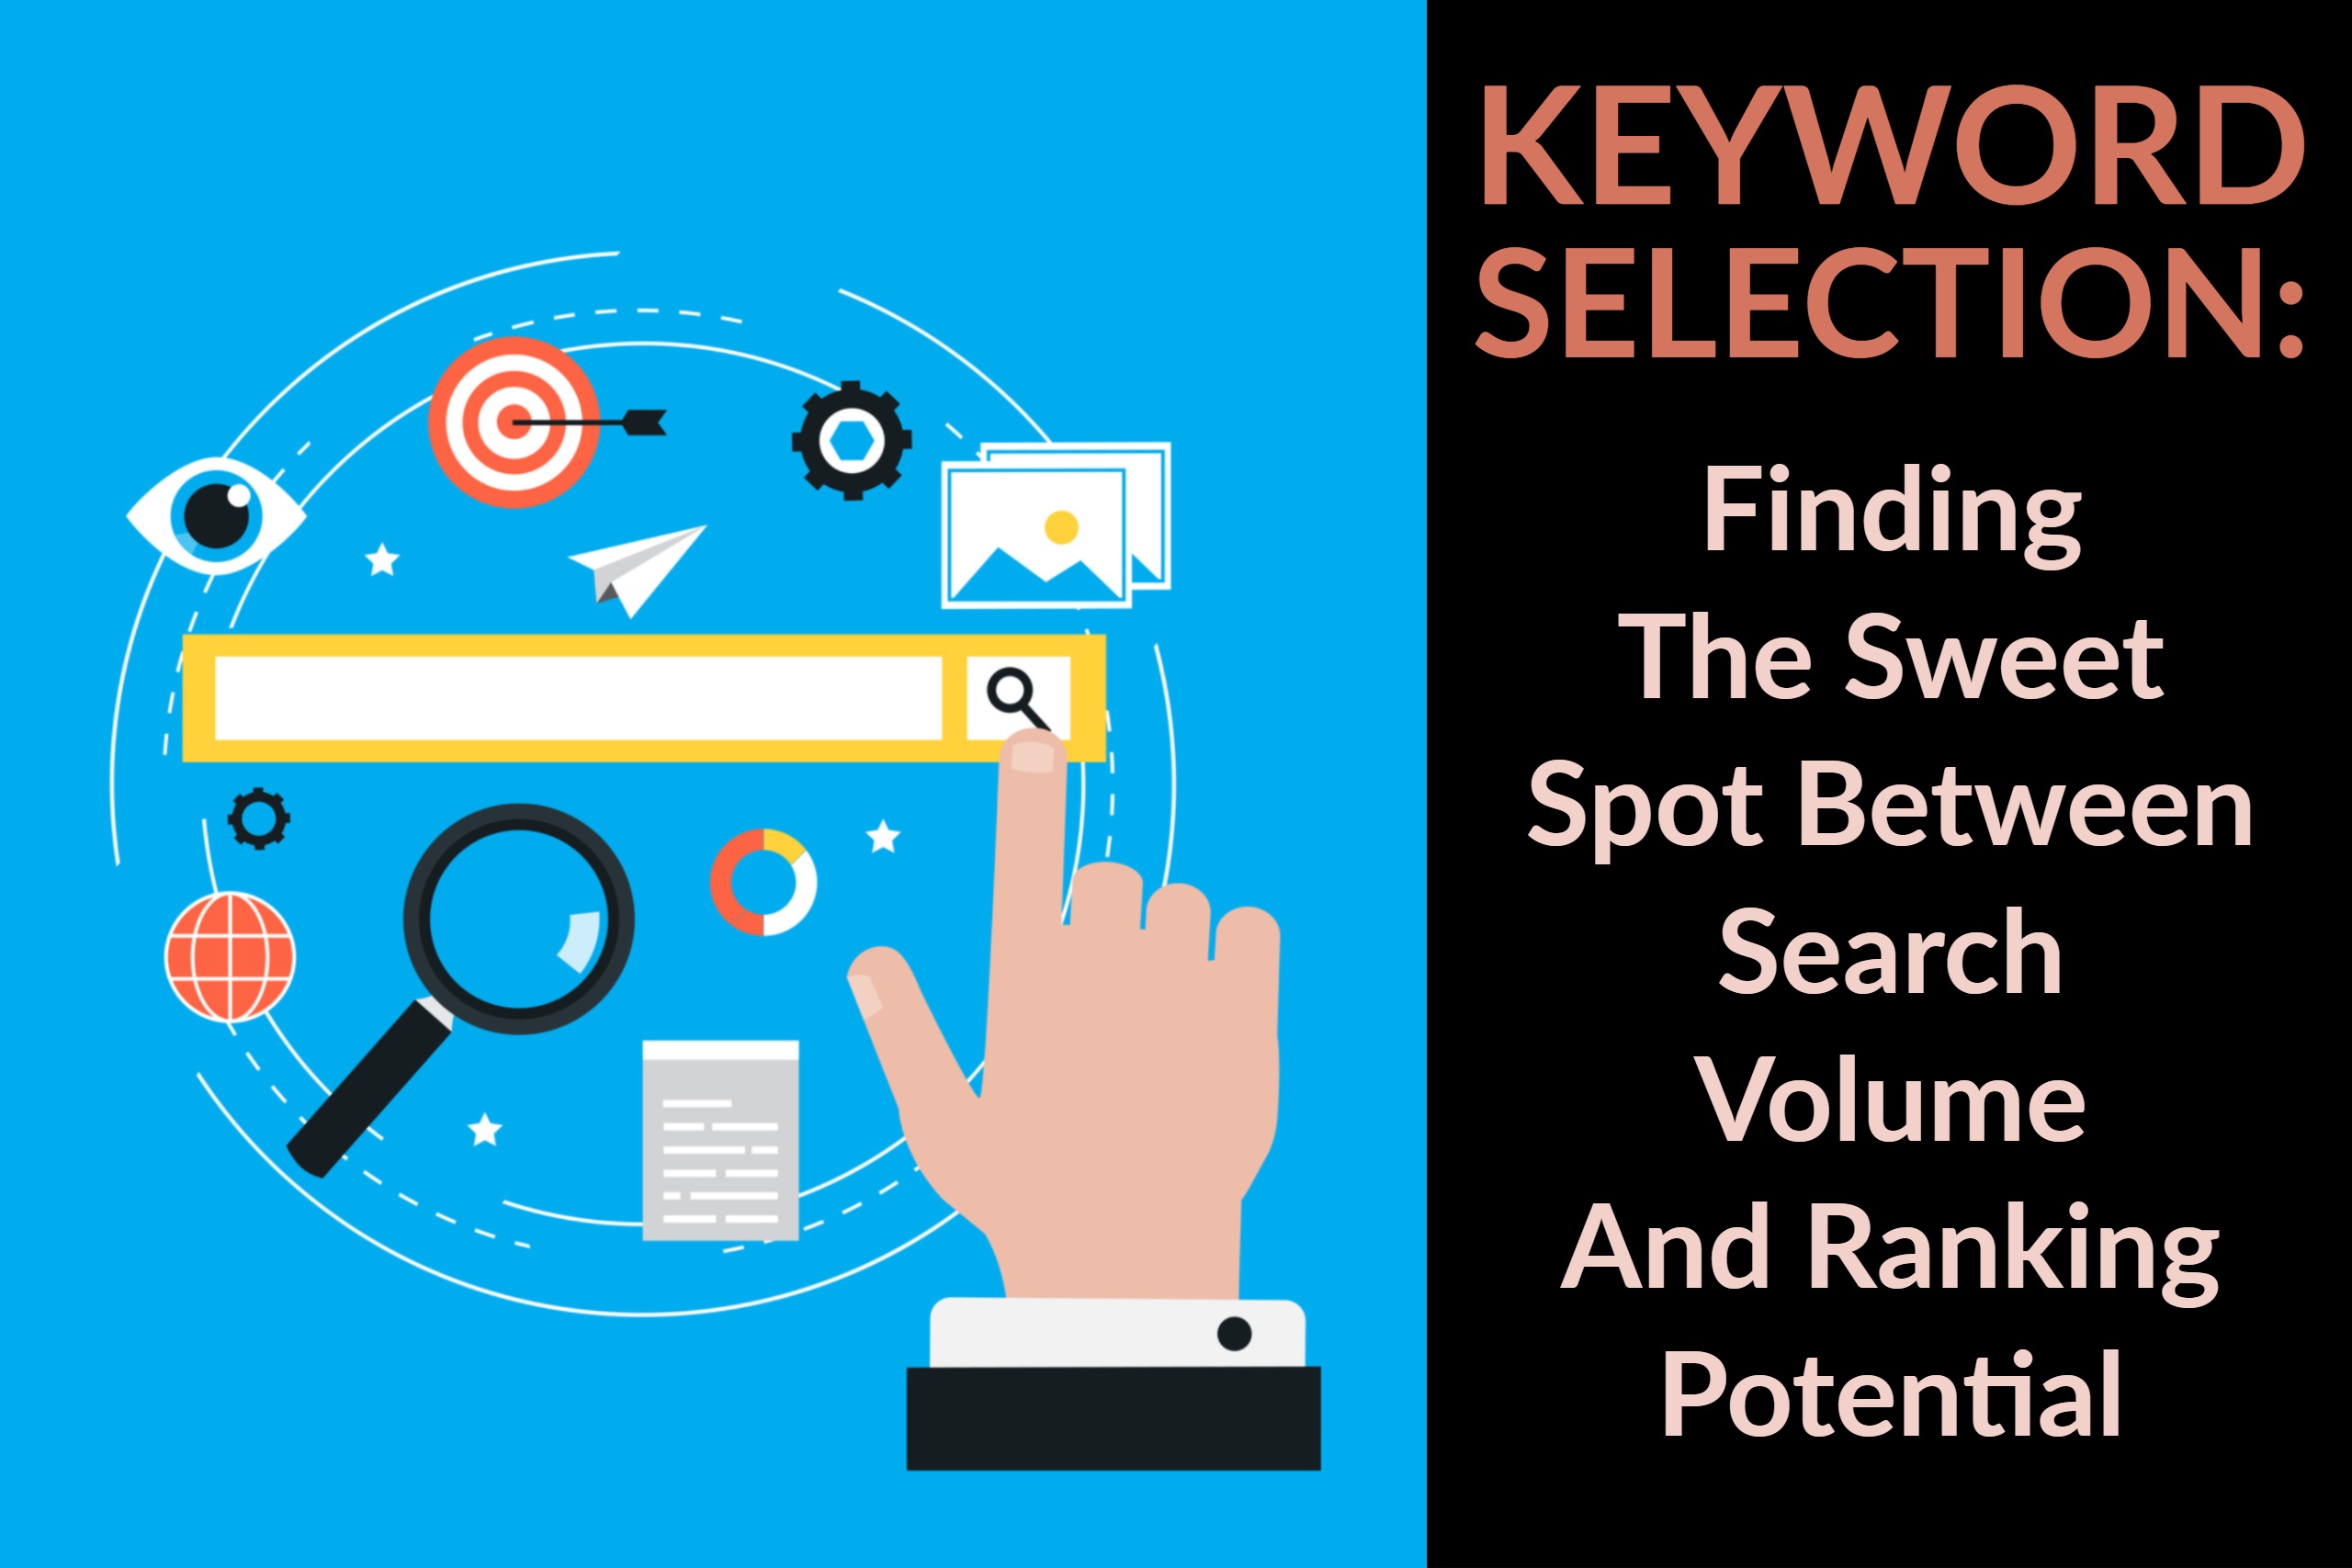 Keyword Selection: Spot Between Search Volume And Ranking Potential